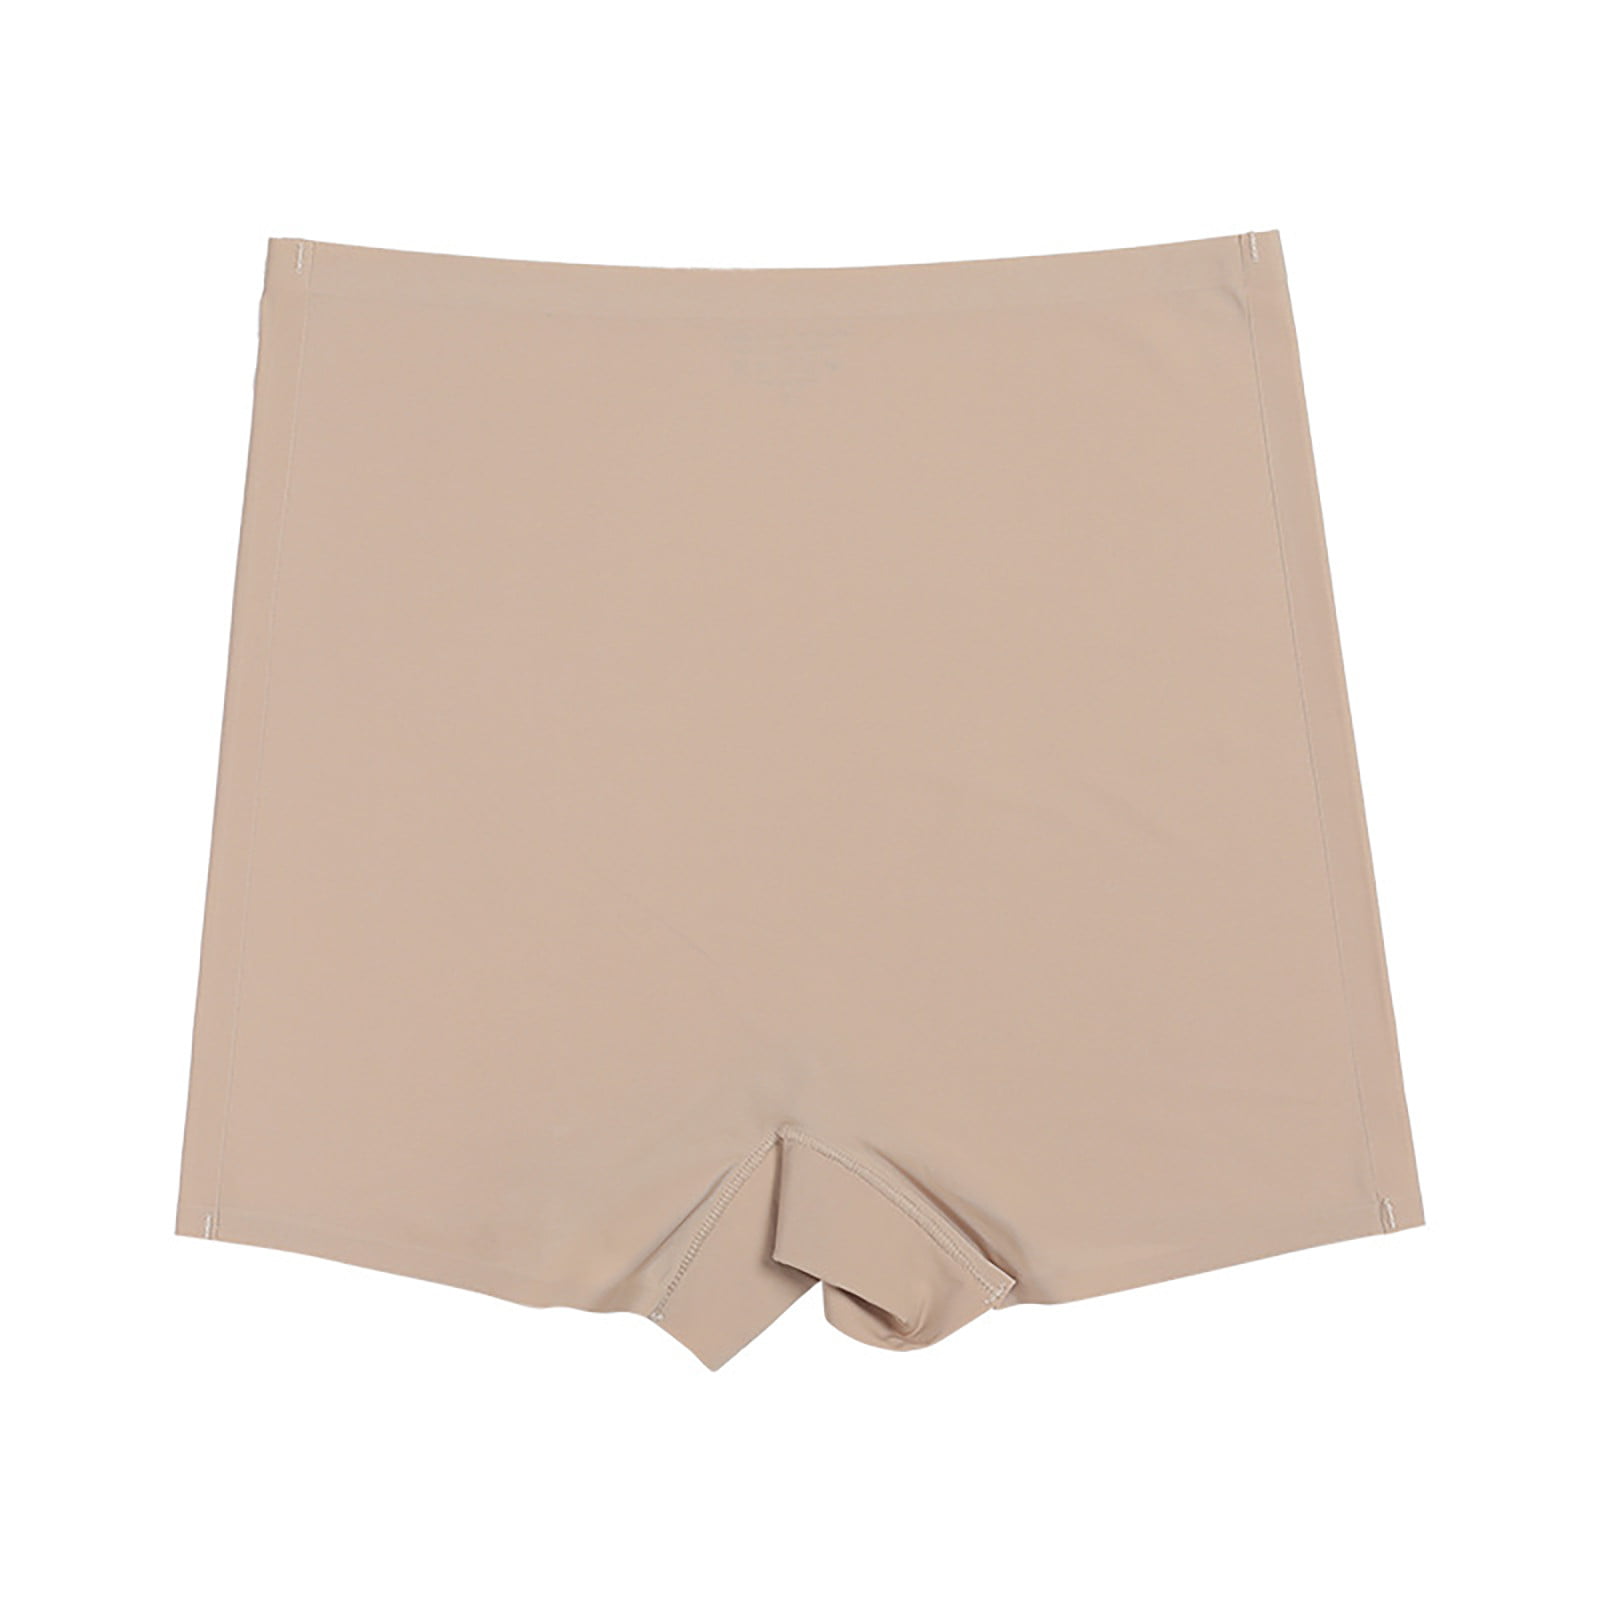 Buy KBS Women's Seamless Boyshort Panties for Women Shorts Panty high Waist  Shorts Women no Panty Lines- (Free Size 30-38)(Pack of 3)(Multi Colored)  (Baby Pink) at